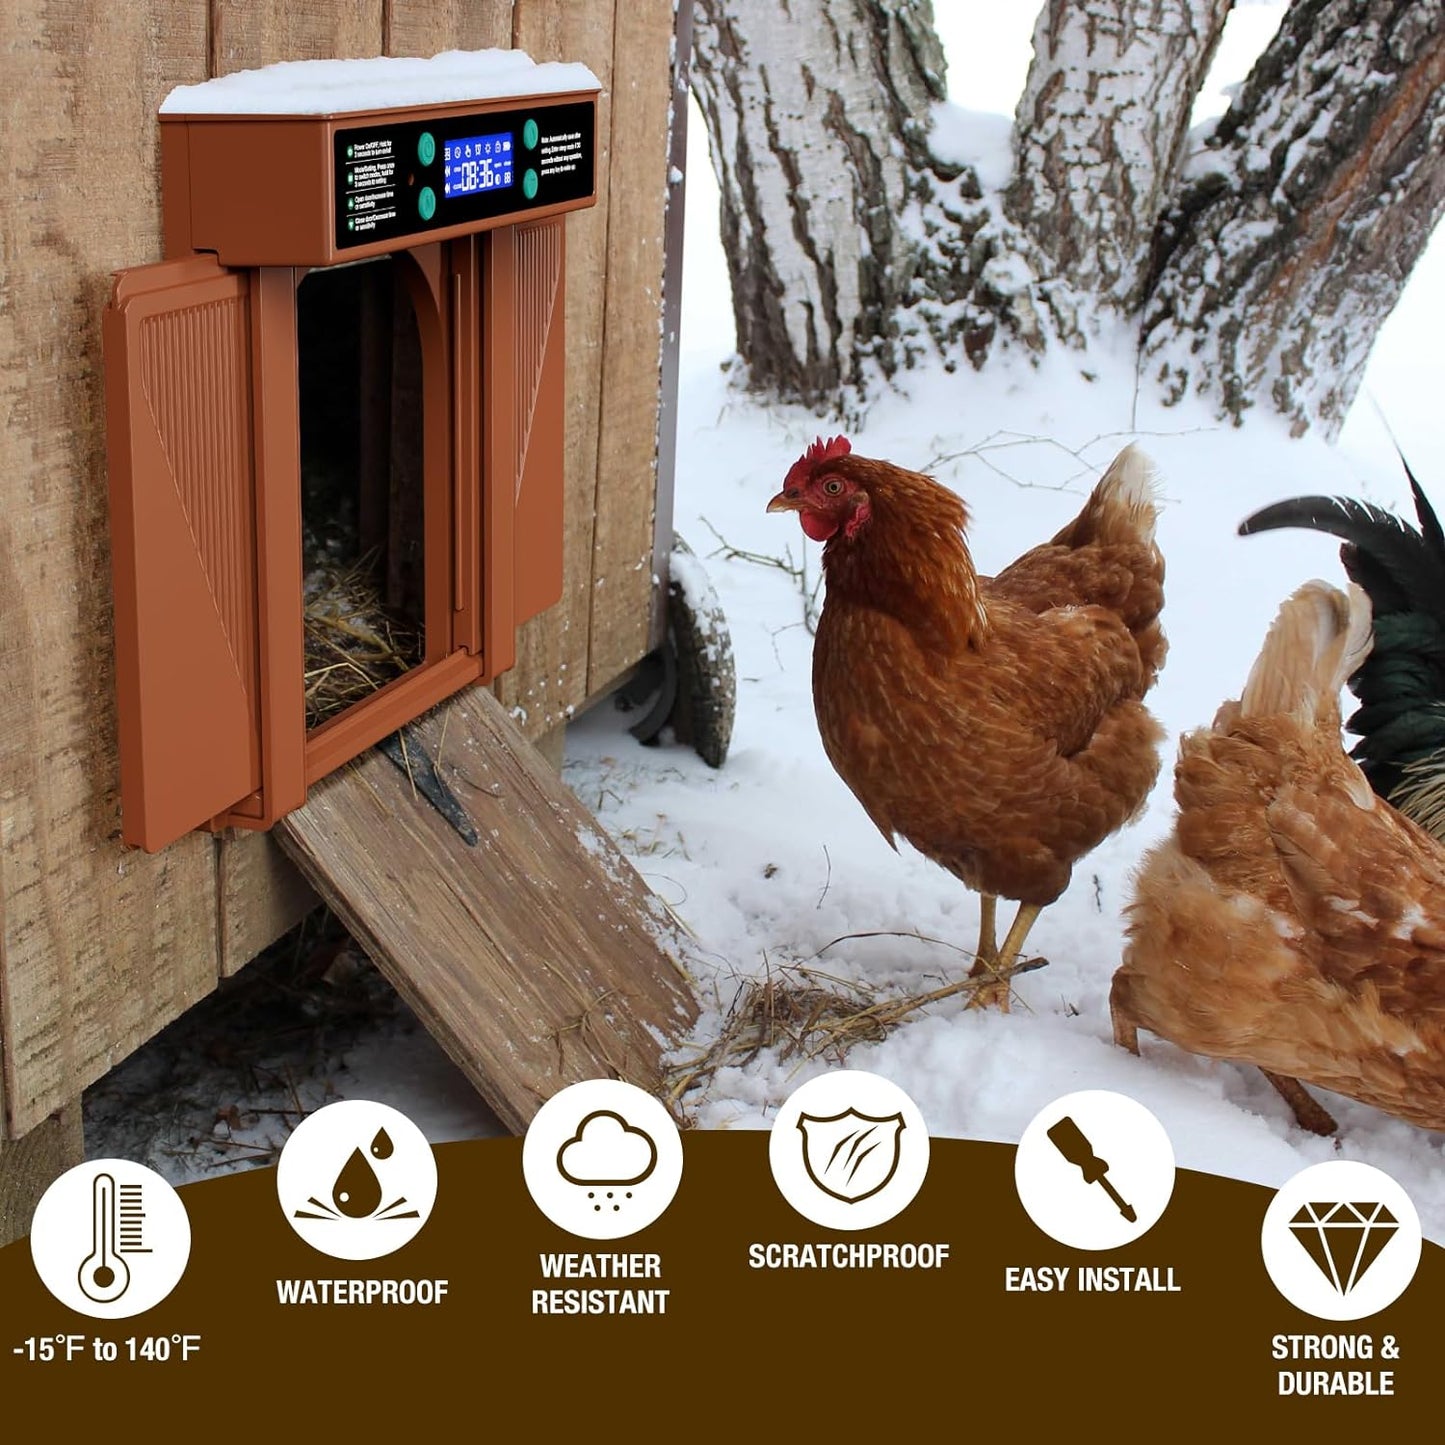 Automatic Chicken Coop Door 3 Modes for Opening and Closing - Manual,Timer and Light Sensor, Anti-Pinch Auto Chicken Door Powered by Battery/DC